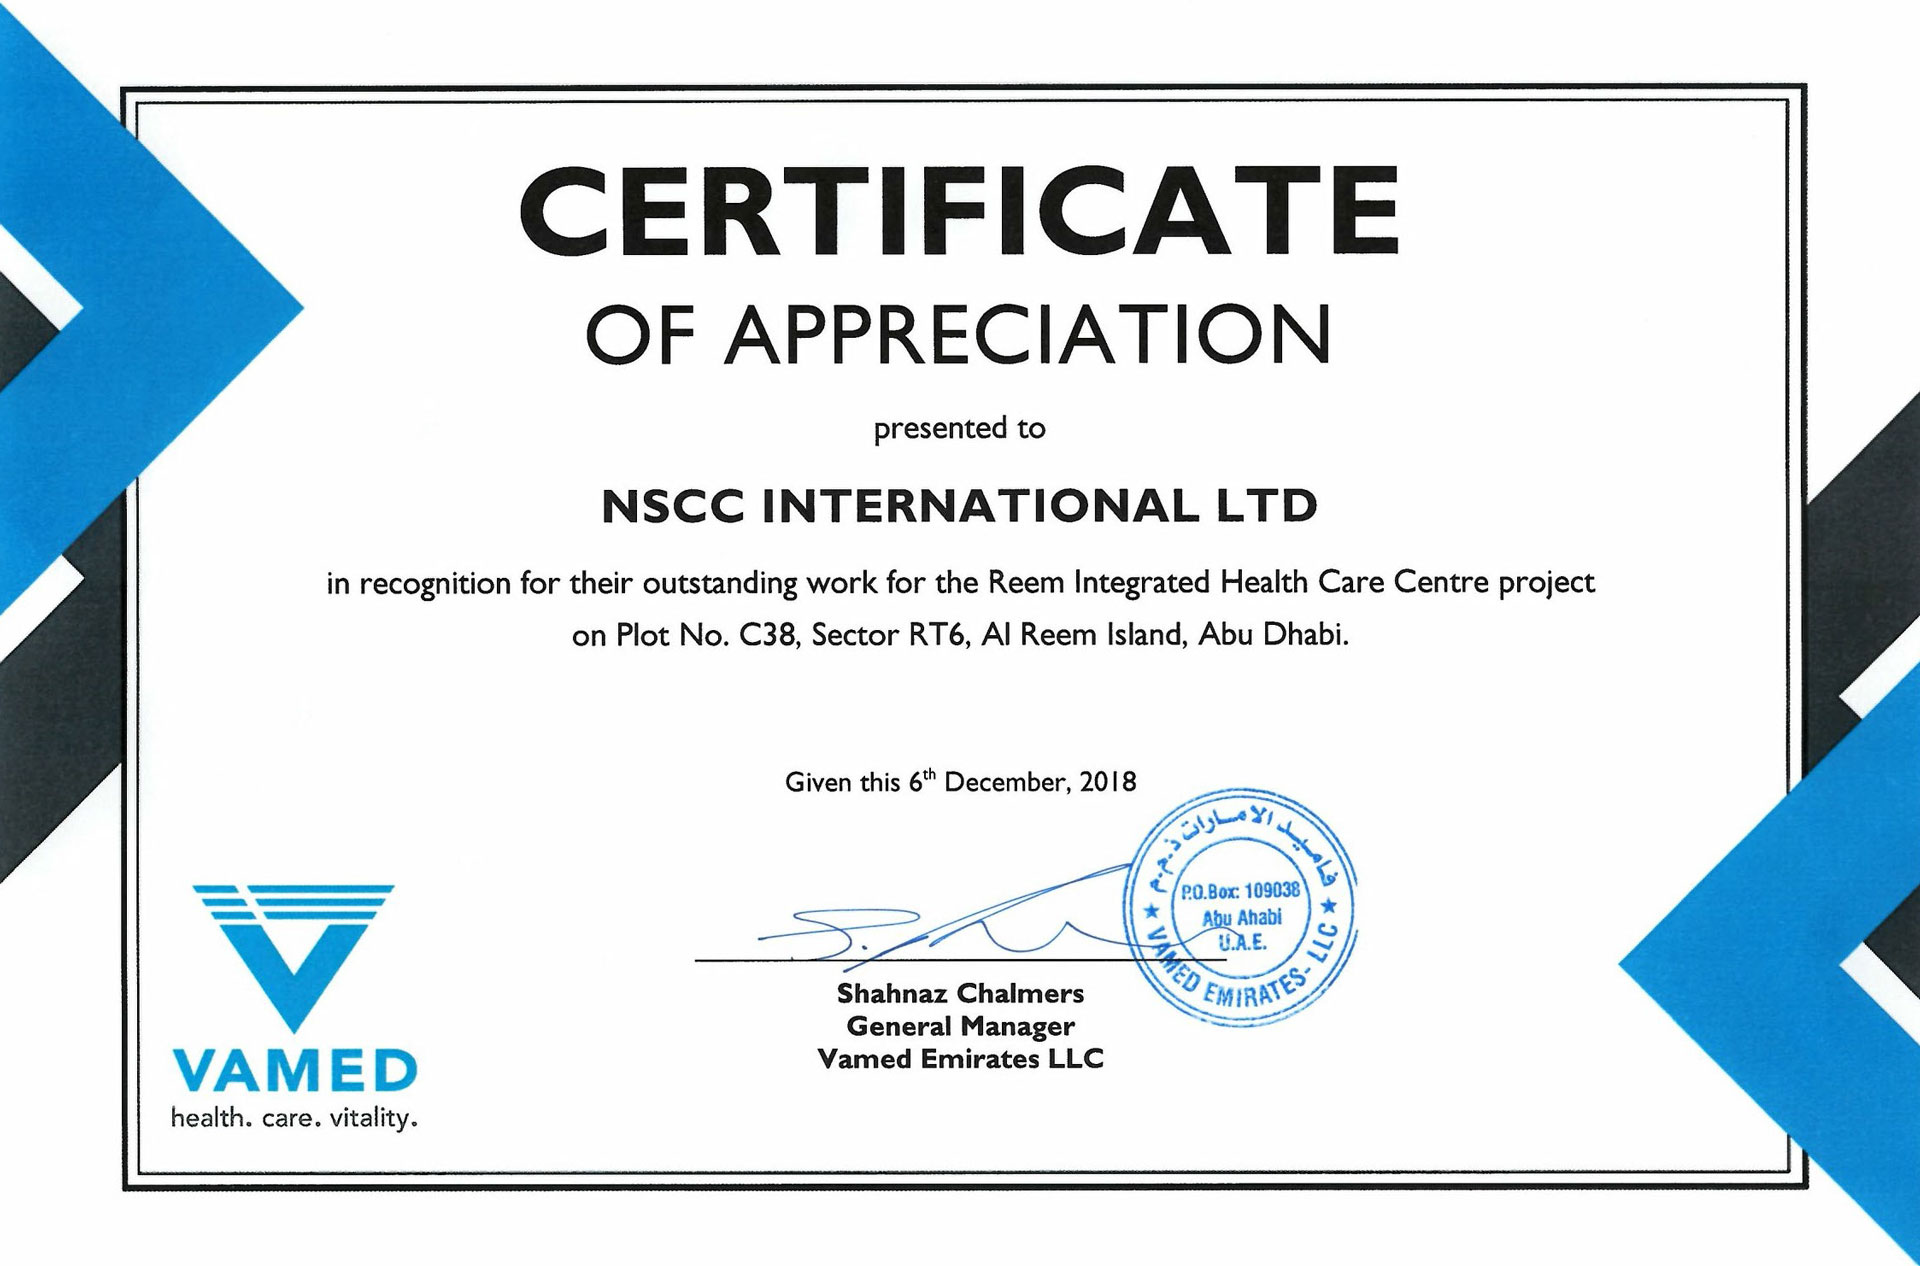 Certificate of Appreciation for Reem Integrated Health Care Centre Project